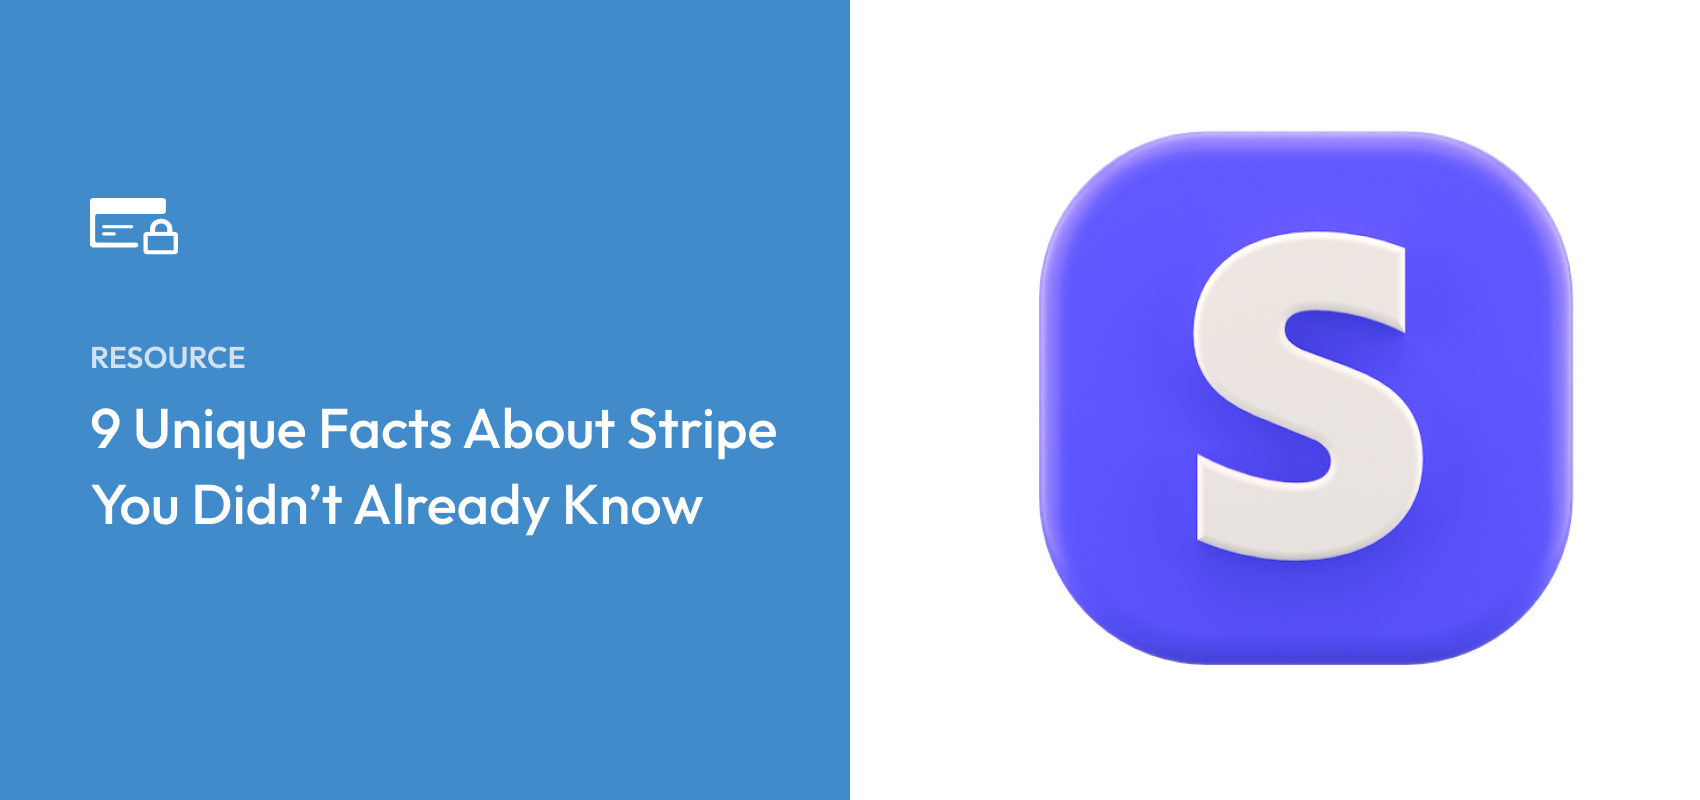 9 Unique Facts About Stripe You Didn’t Already Know